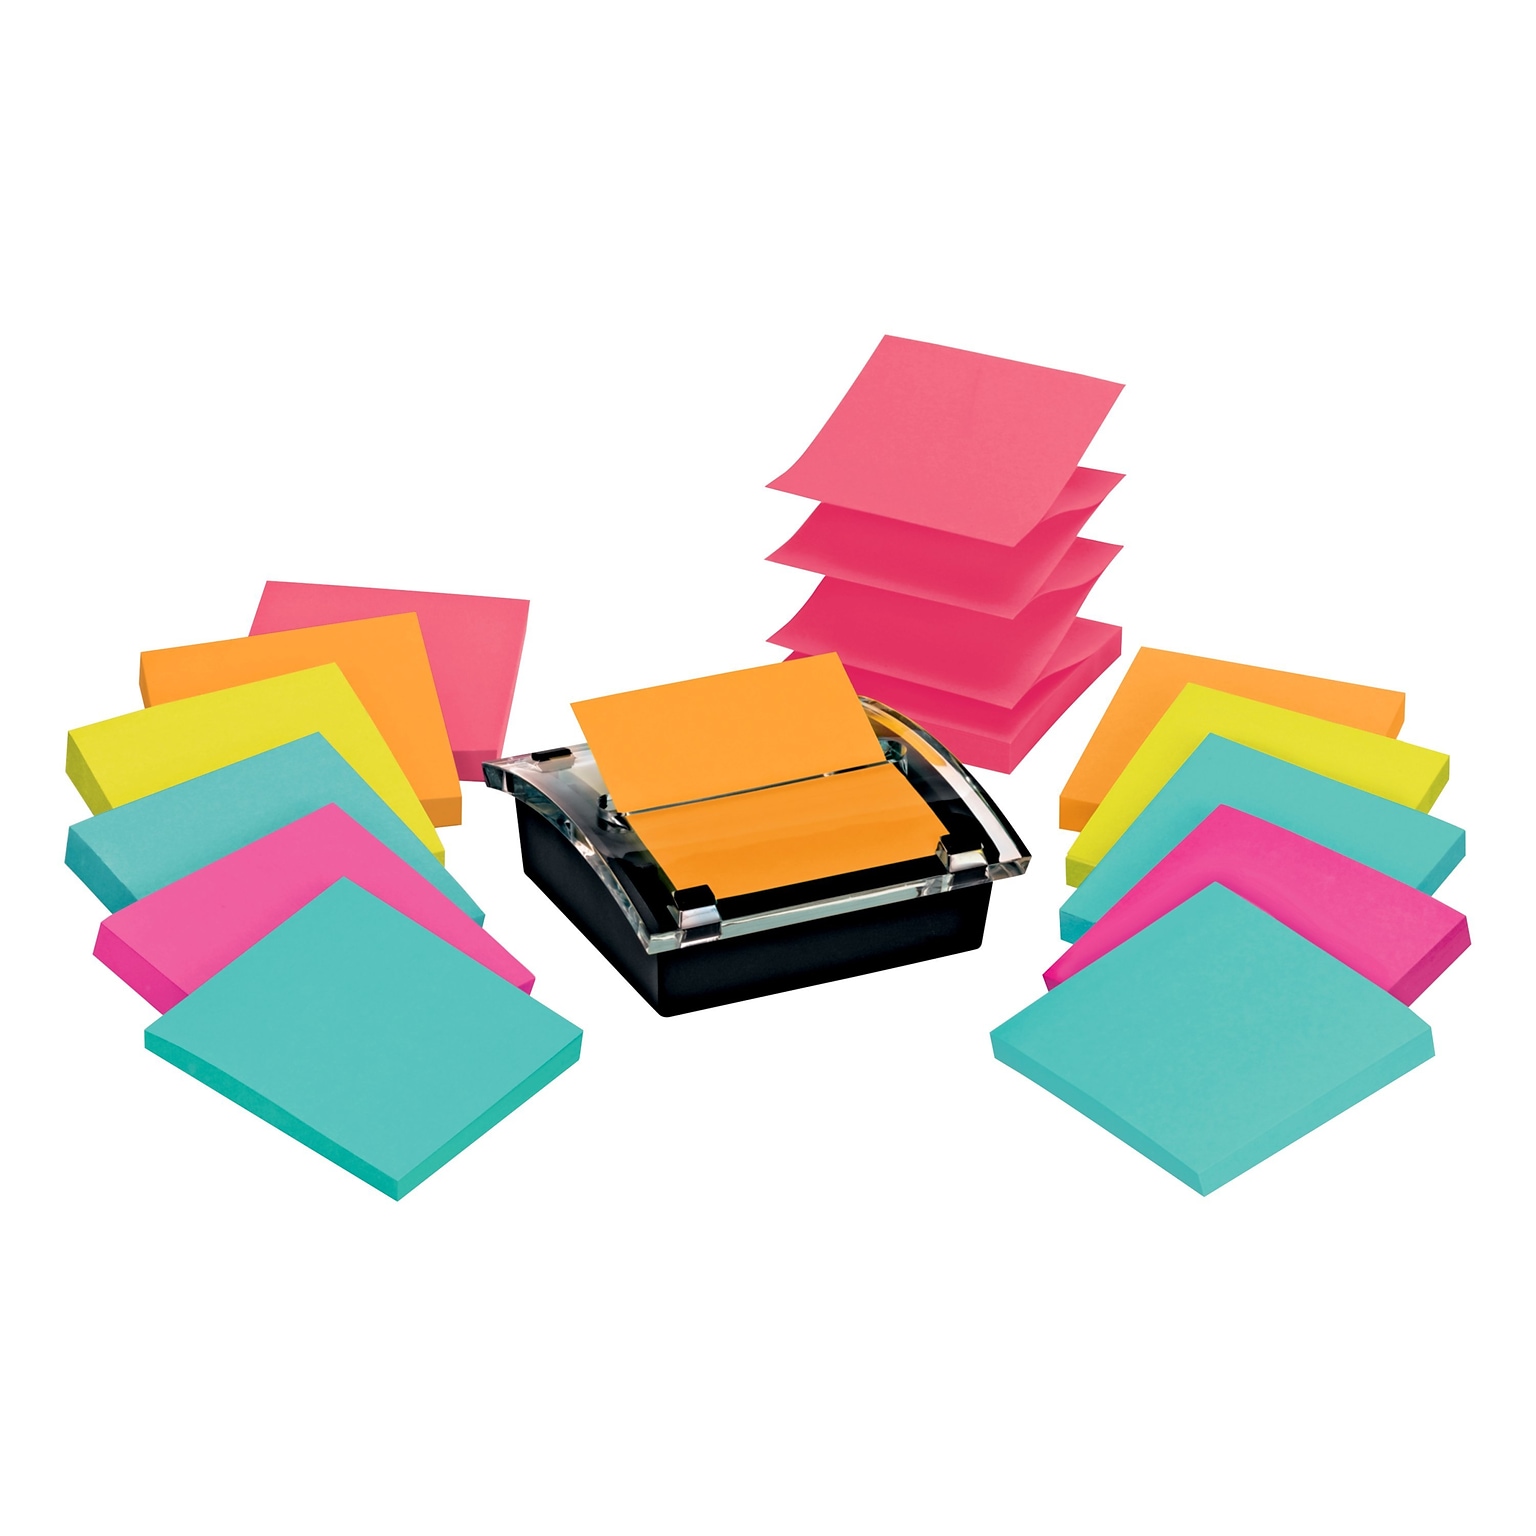 Post-it Super Sticky Pop Up Notes, 1 Dispenser, 12 Pads, 90 Sheets/Pad, 2x the Sticking Power, Assorted Colors